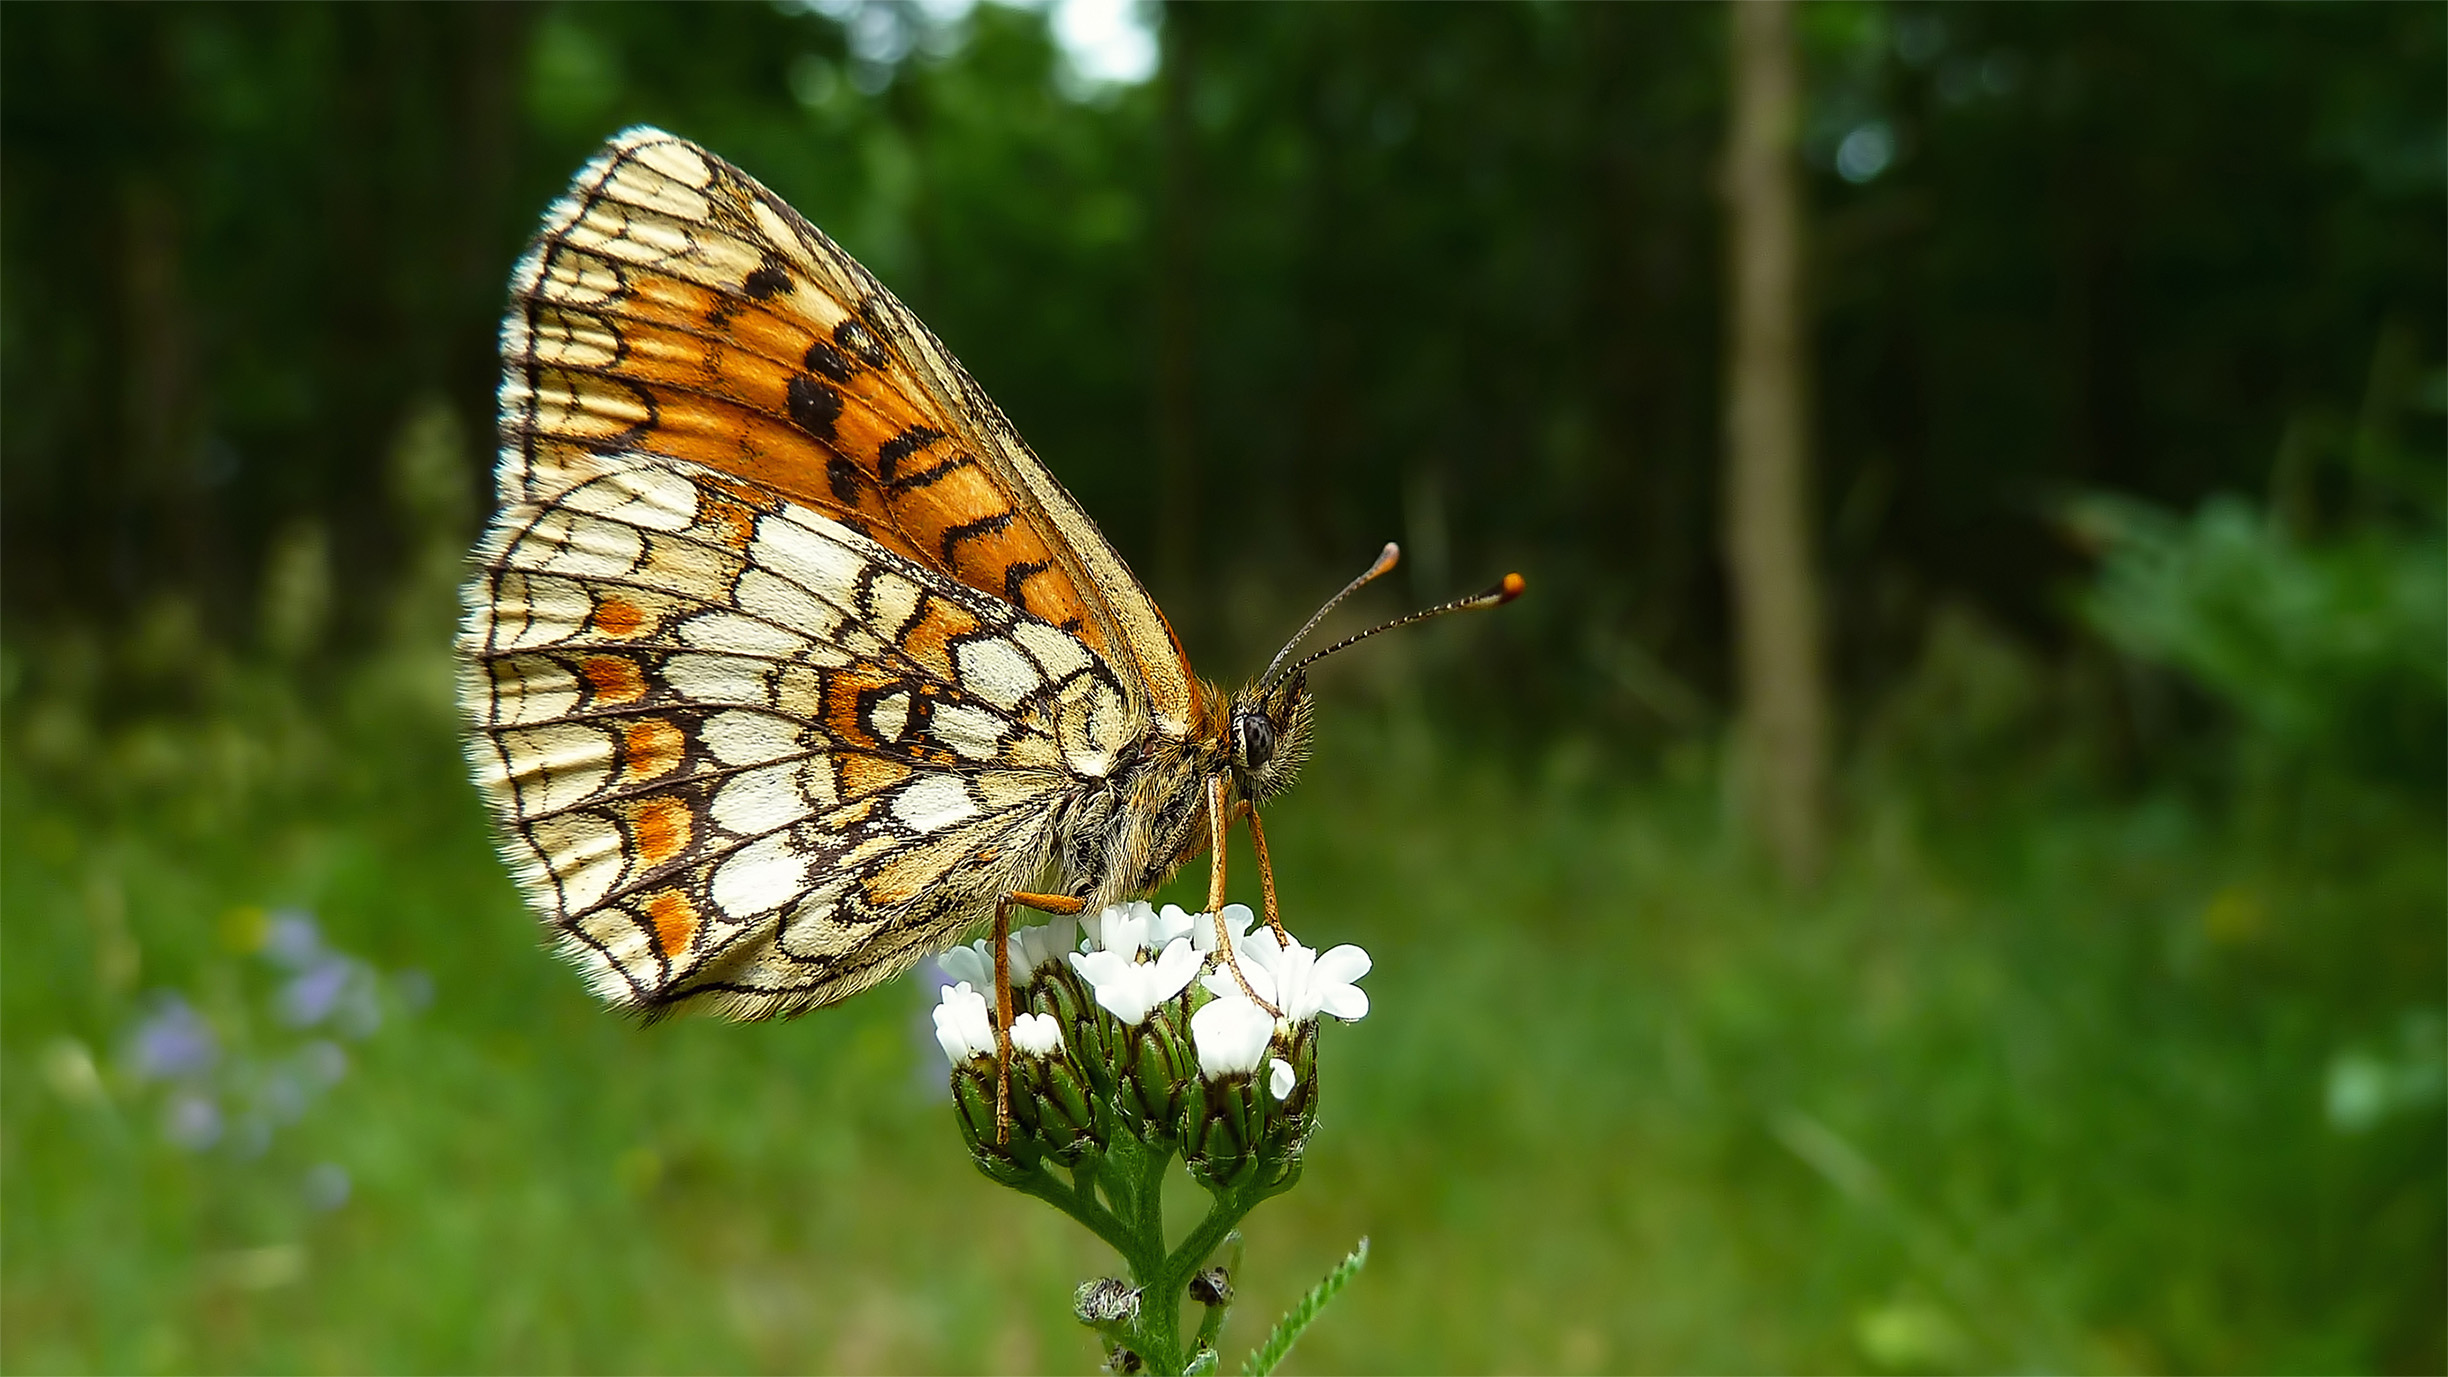 A butterfly sitting on a white flower. It's wings are closed, showing the delicate pattern of cream and orange markings.